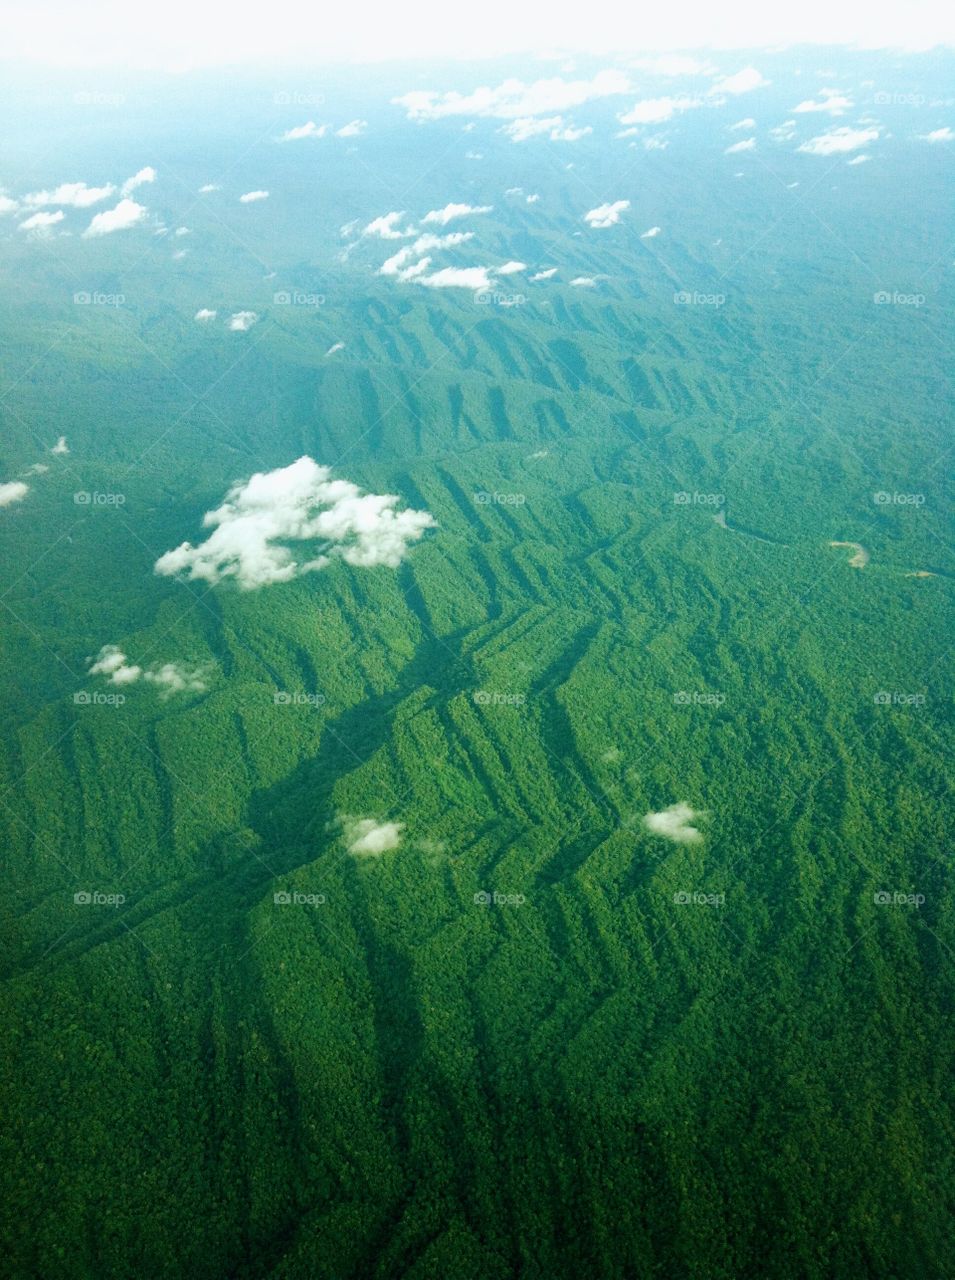 Papuan mountains in a beautiful pattern